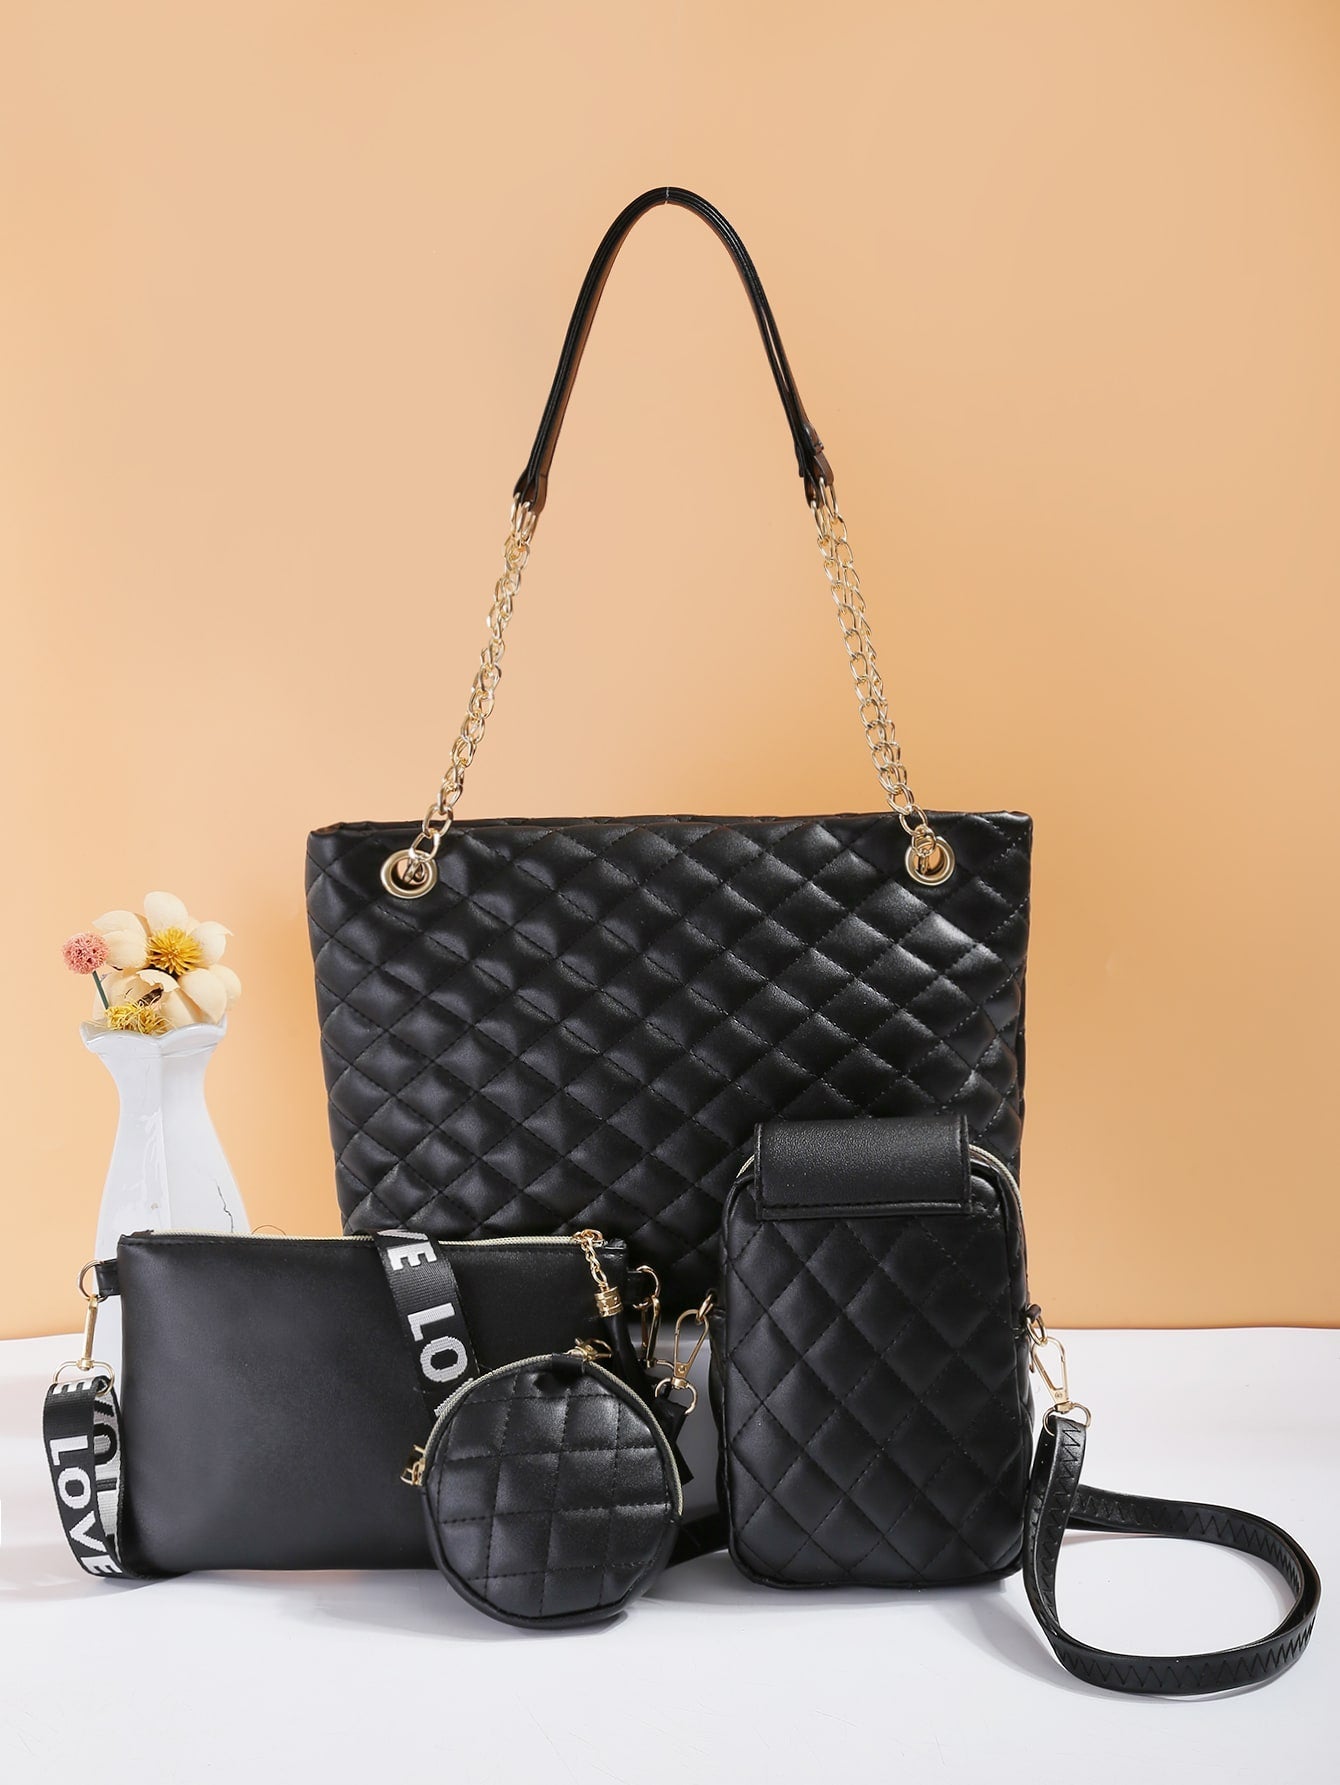 Trendy And Fashionable New Style Mini Women'S Combination Bag With Tote, Crossbody And Single Shoulder Options